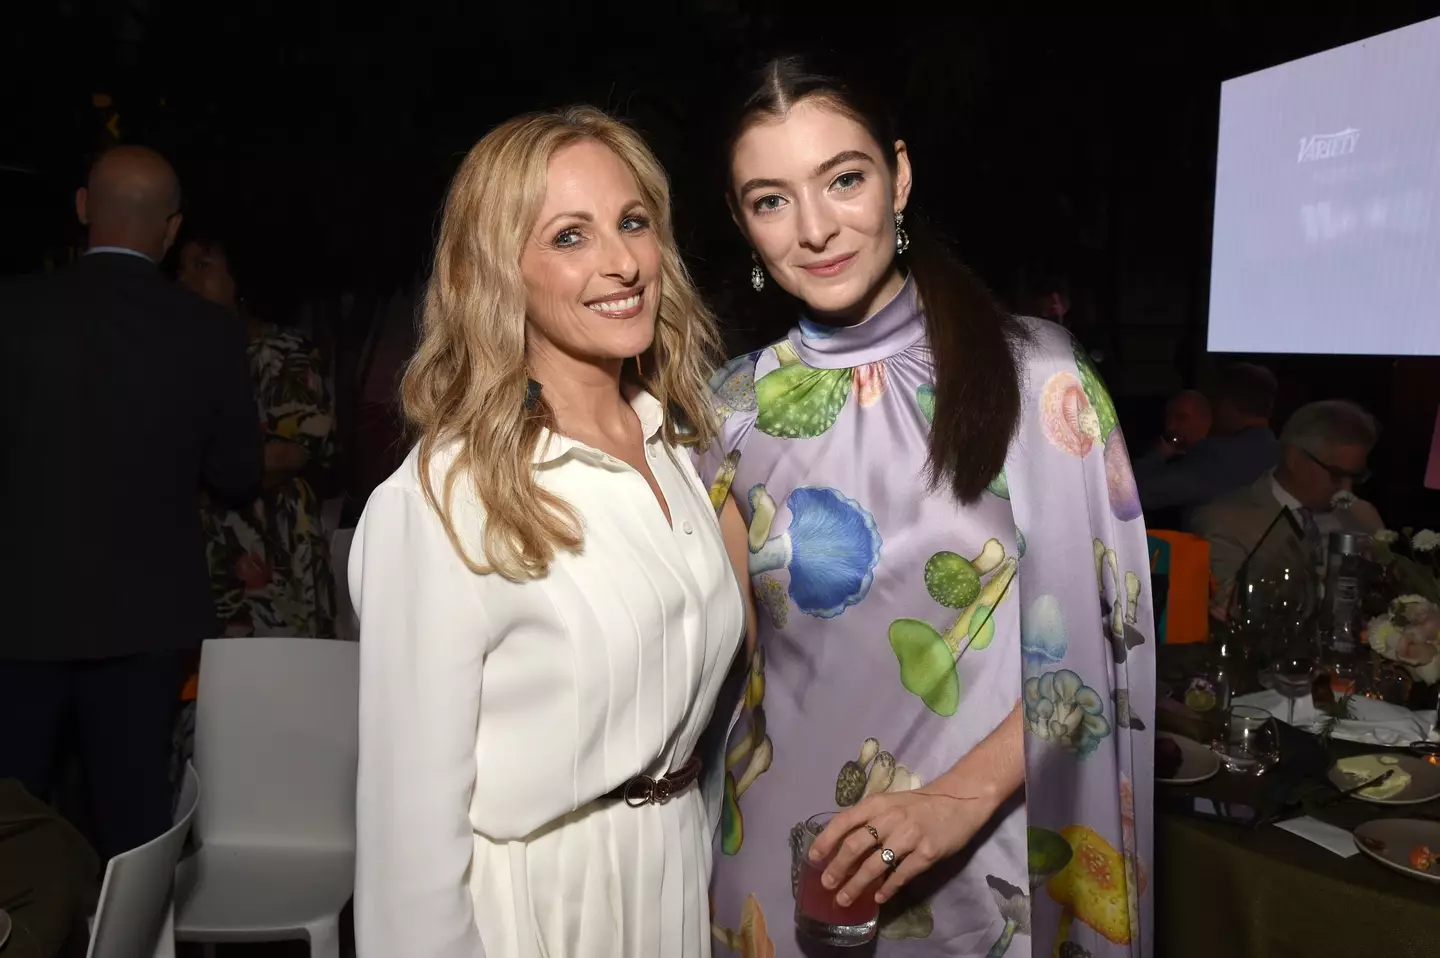 Lorde, pictured with Marlee Matlin, appeared to don an engagement ring at an event in 2021.